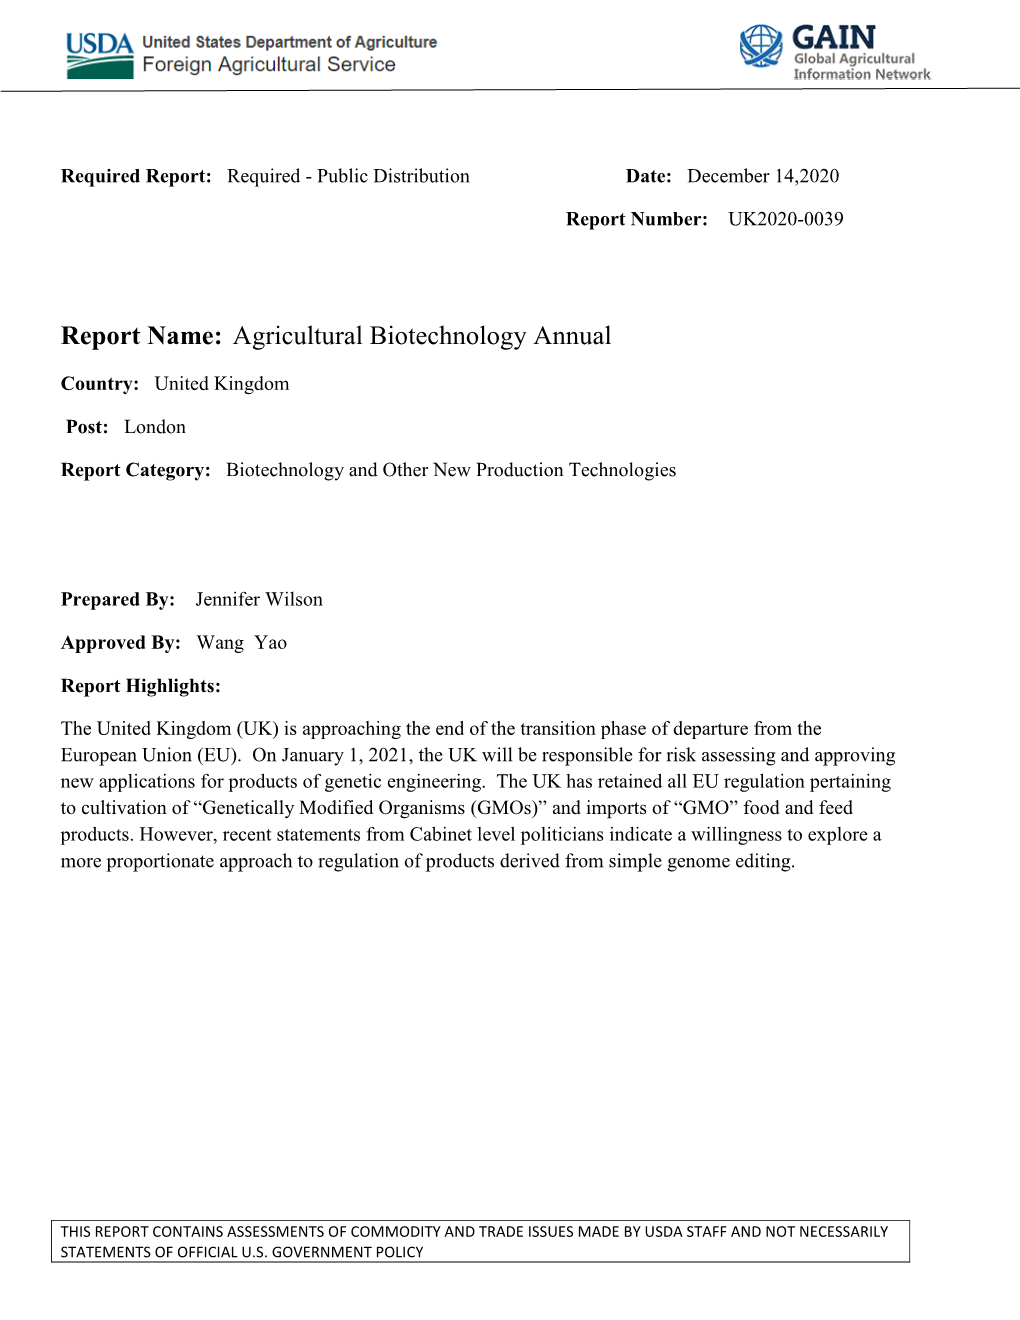 Report Name: Agricultural Biotechnology Annual